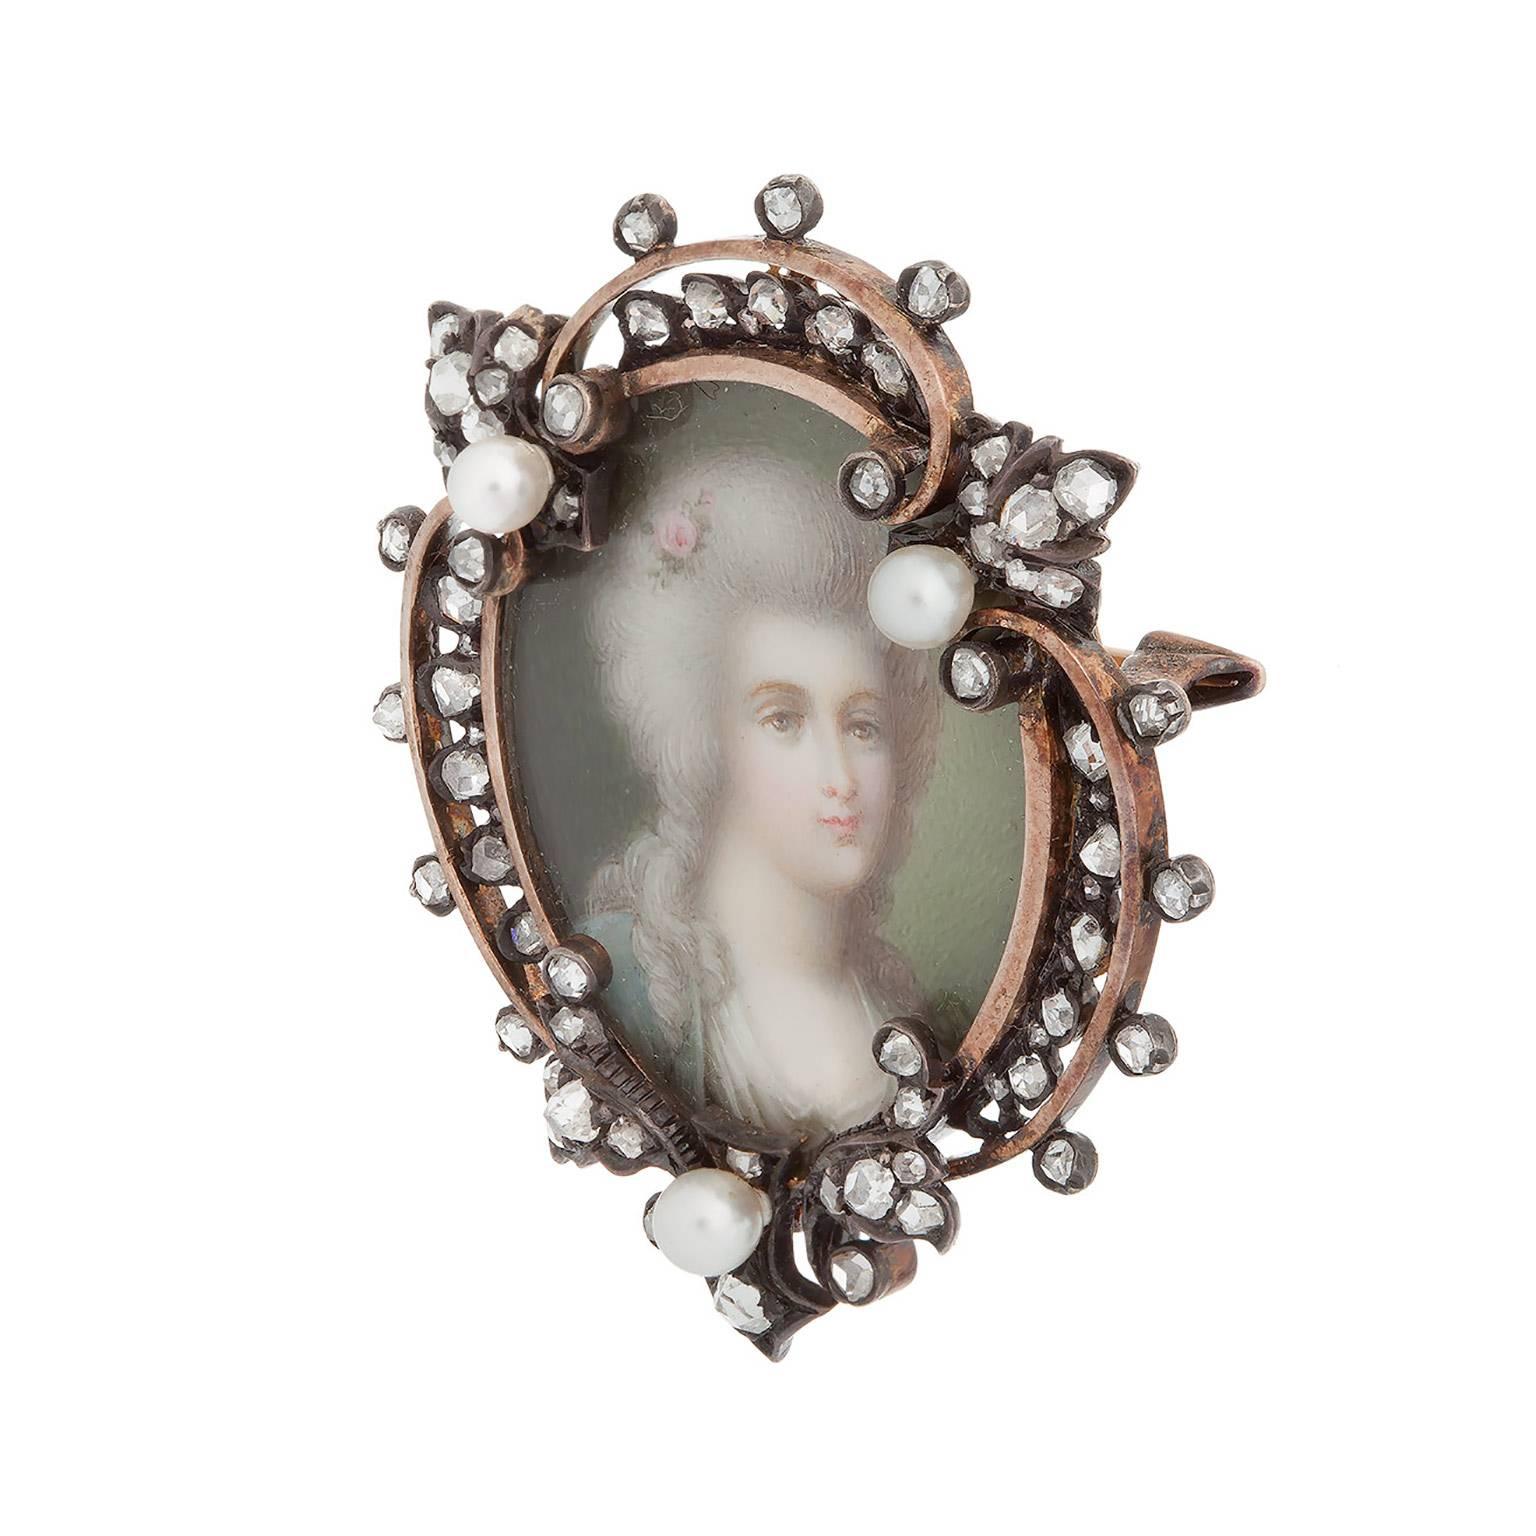 A gorgeous antique portrait brooch with diamonds and pearls.  There is an estimated 1.10cts total around the frame, with three small pearls, all in 18K yellow gold.  The brooch has a pin back as well as a small bale.

Inscription: 